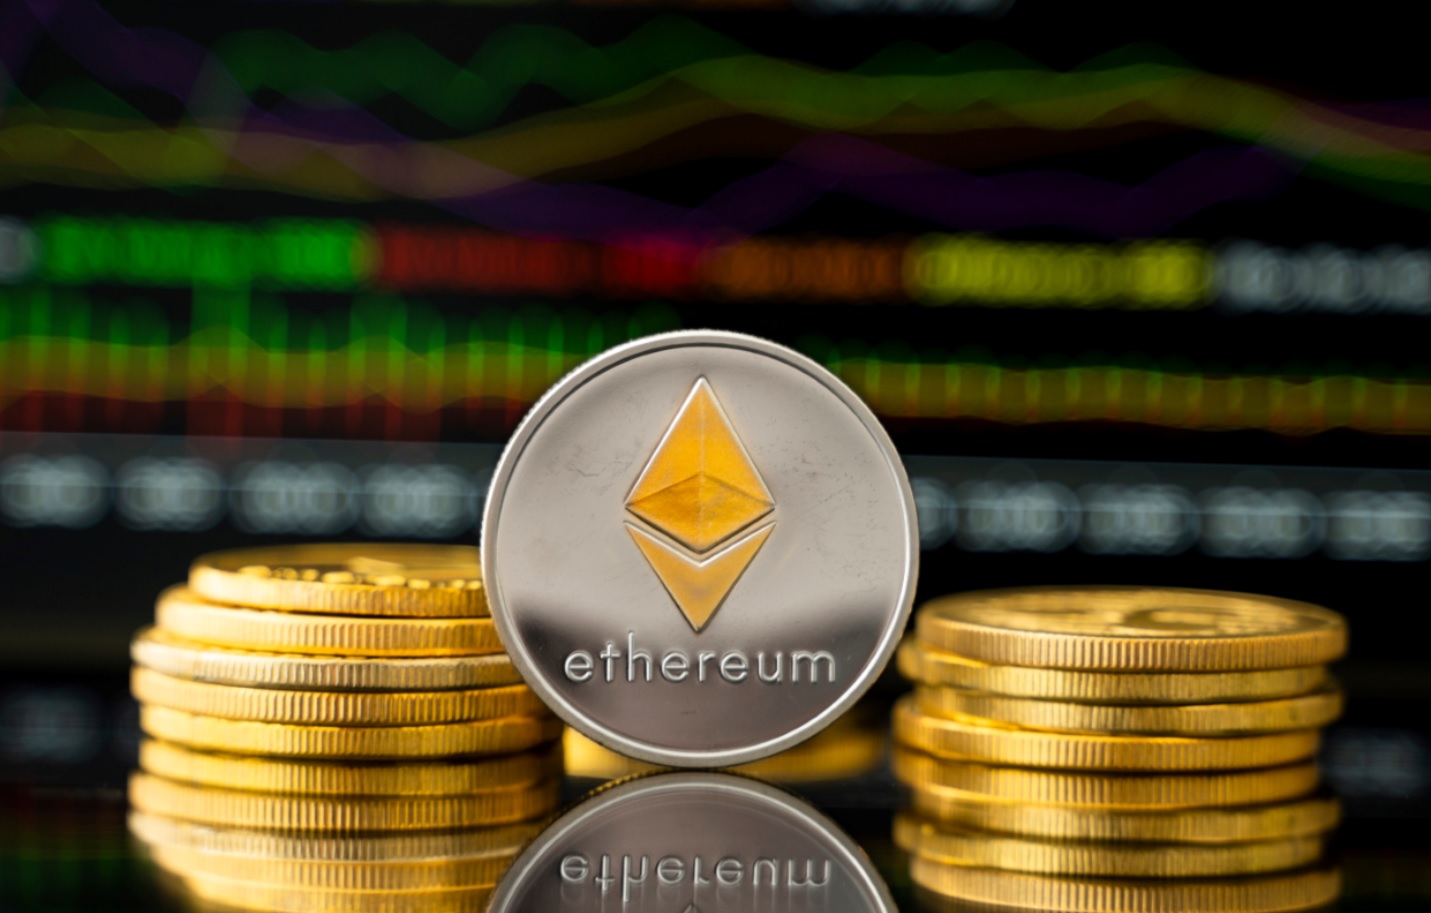 Ethereum’s rejection off its bull market support band could mean an extended bear market